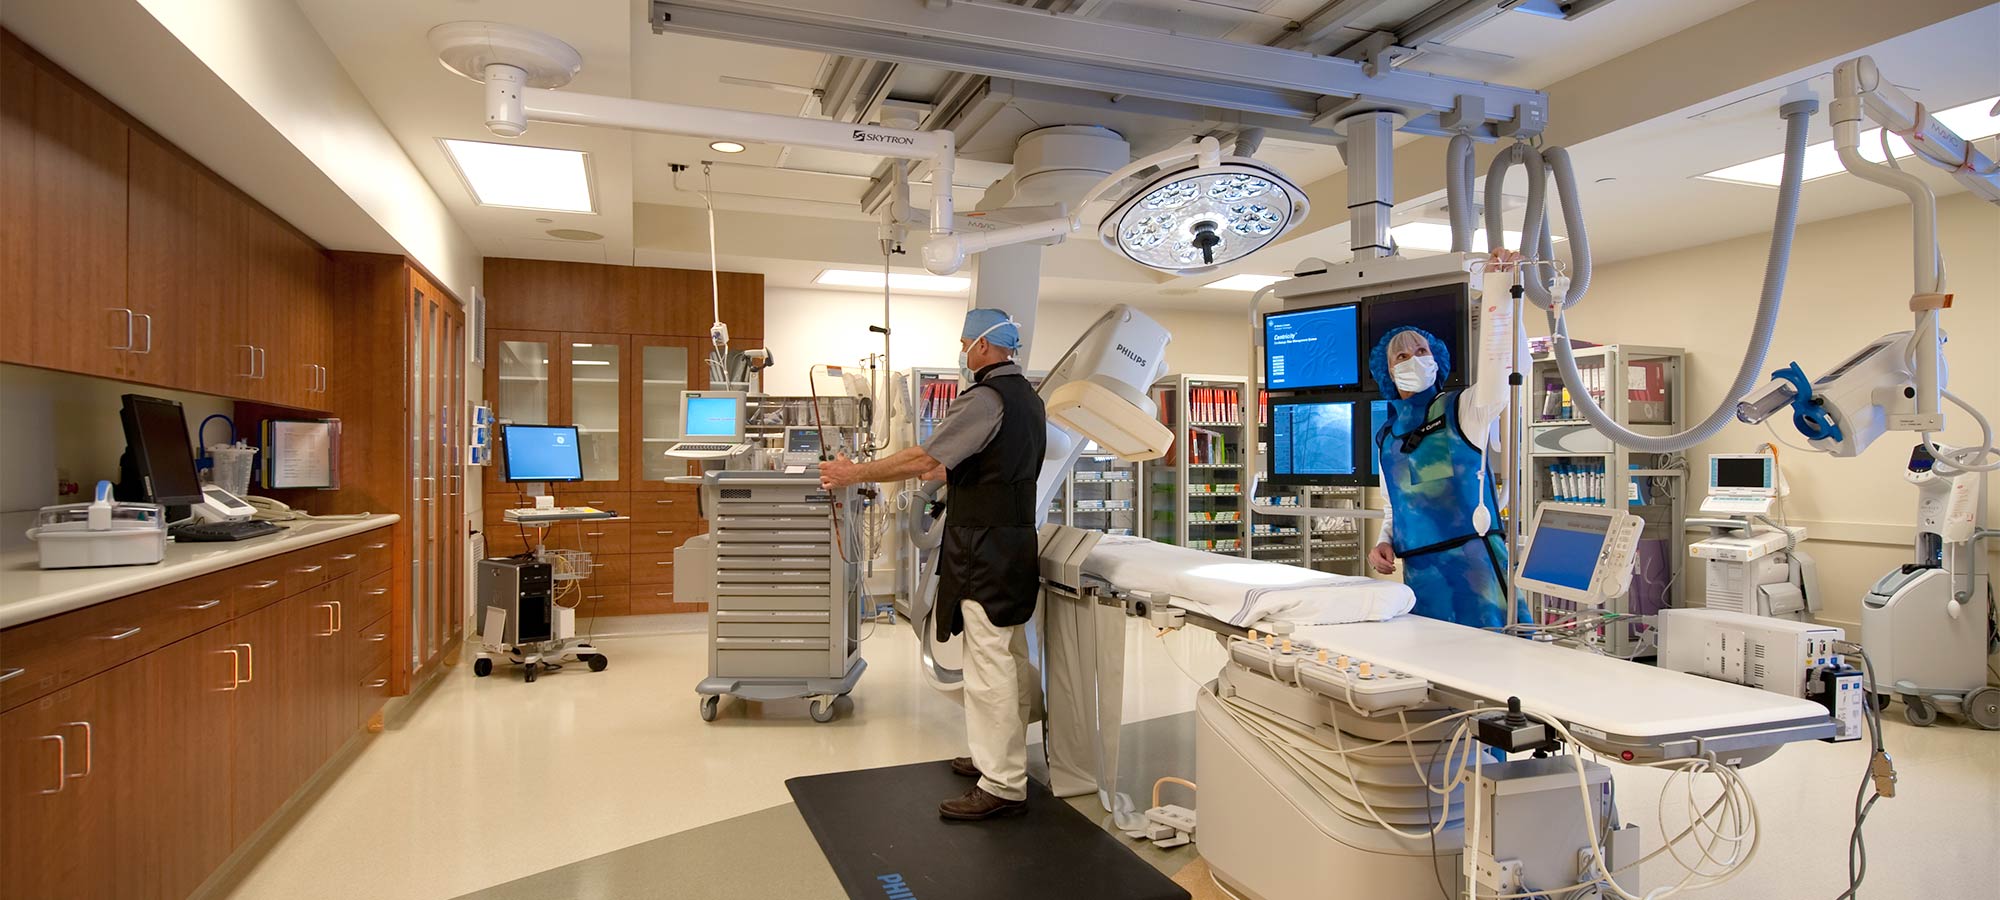 operating room with two medical professionals